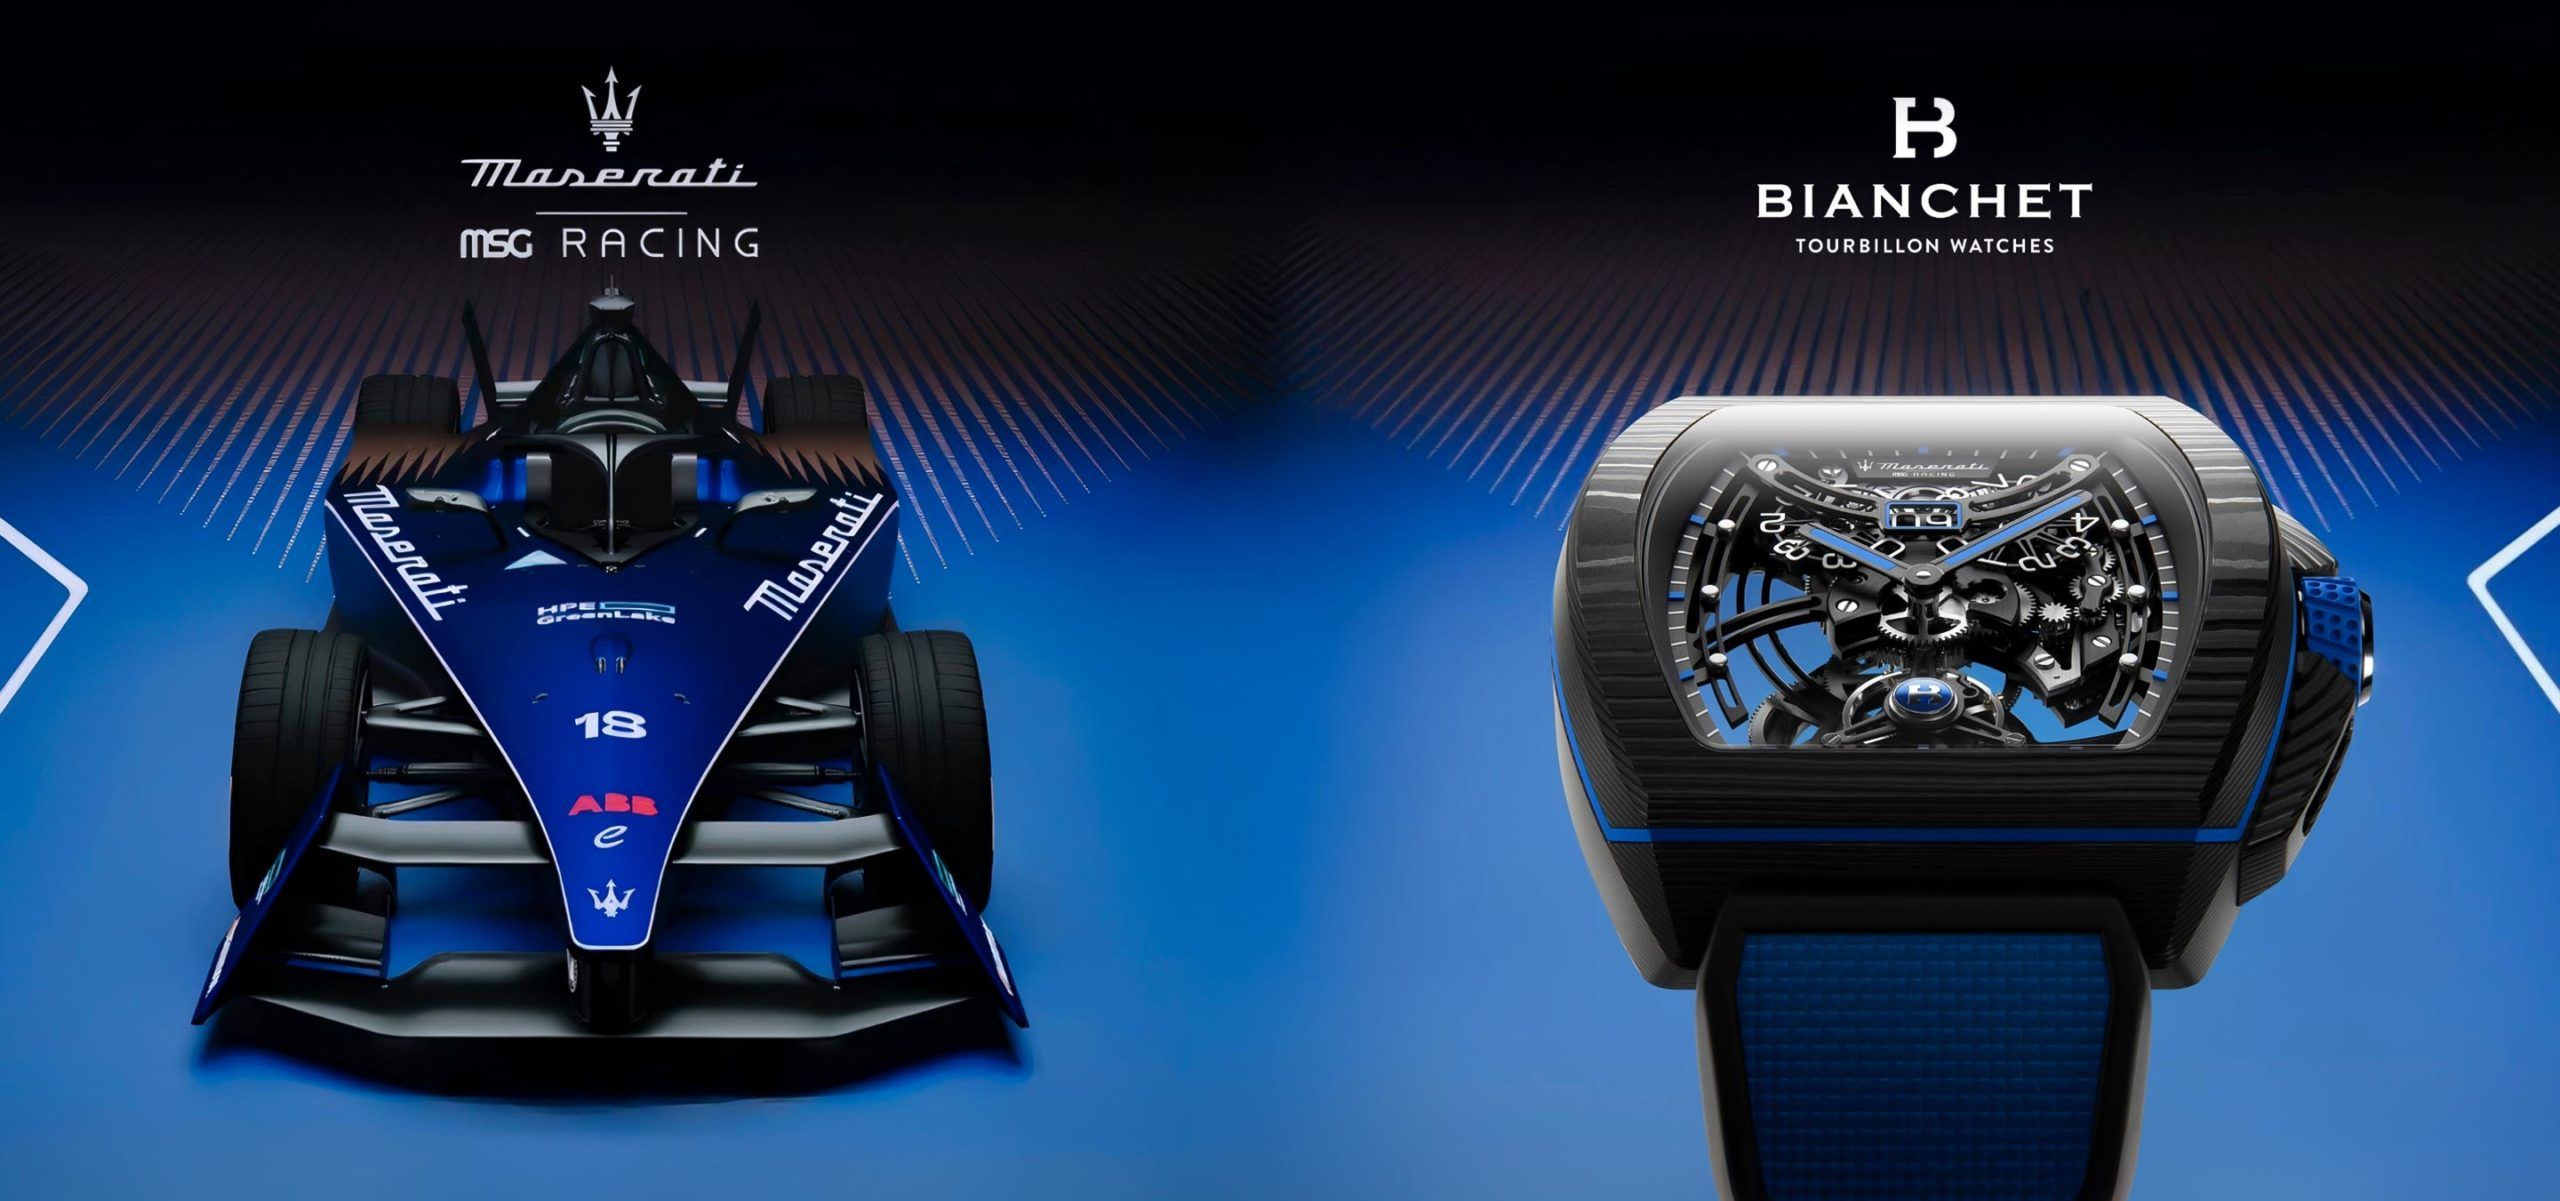 From Track To Timepiece: The Bianchet x Maserati MSG Racing Flying Tourbillon Grande Date